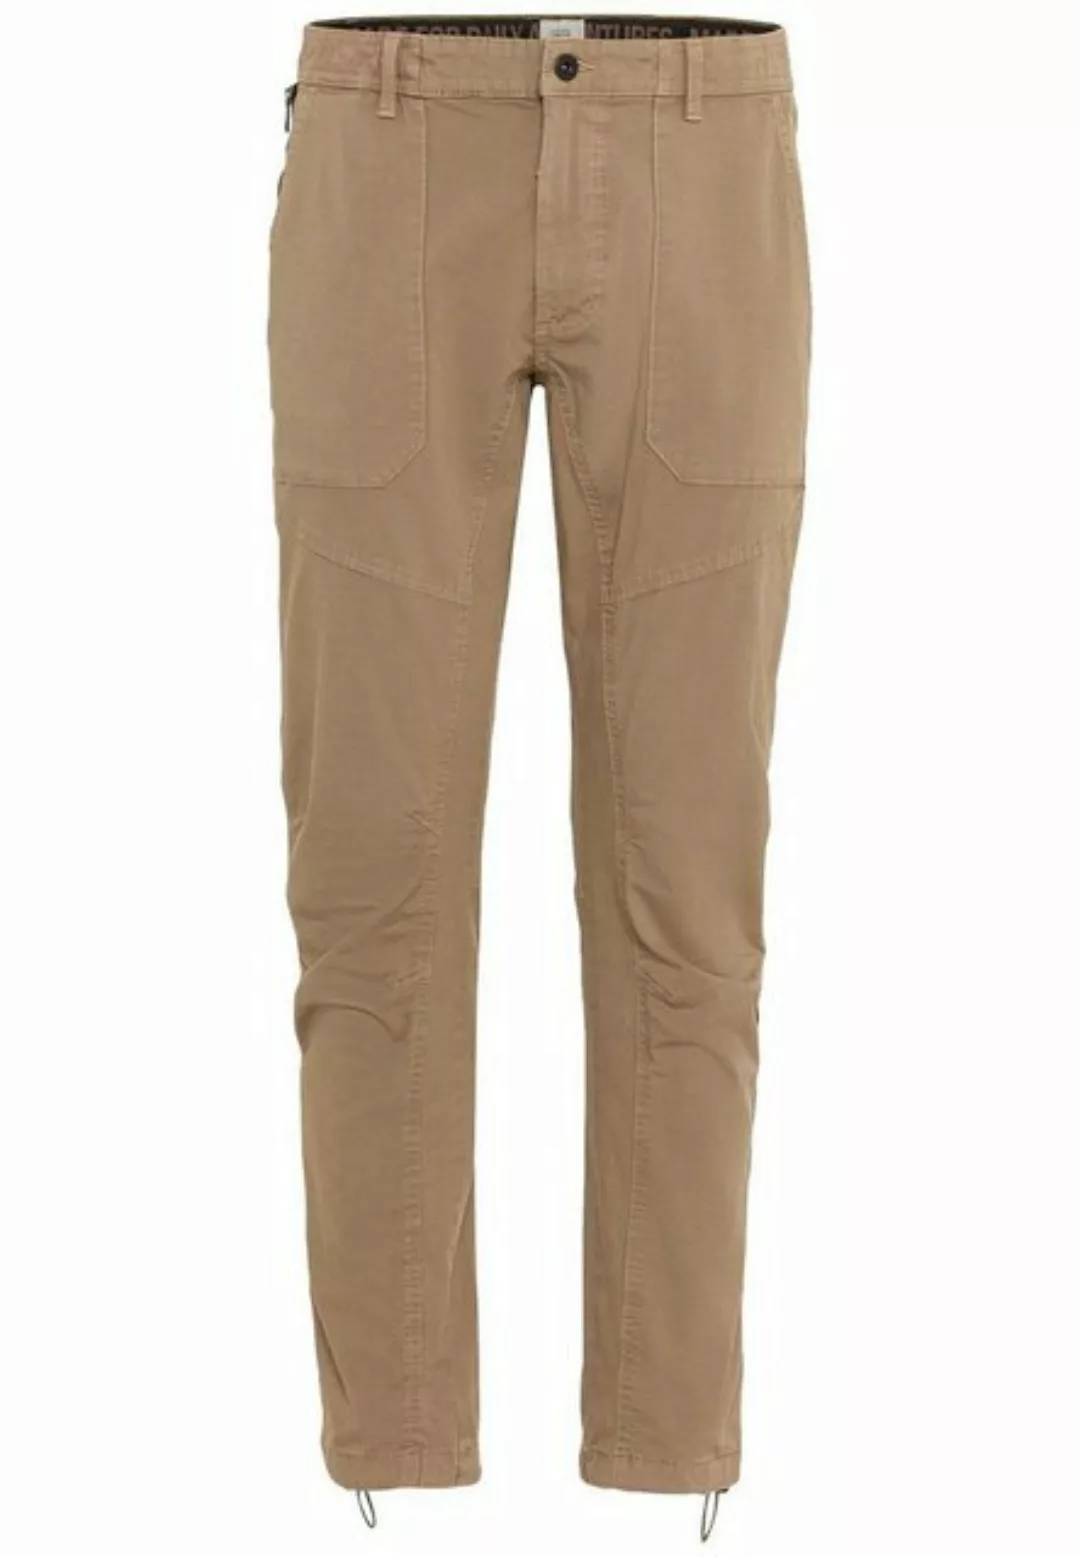 camel active Stoffhose Casual Pants Chino, Wood günstig online kaufen